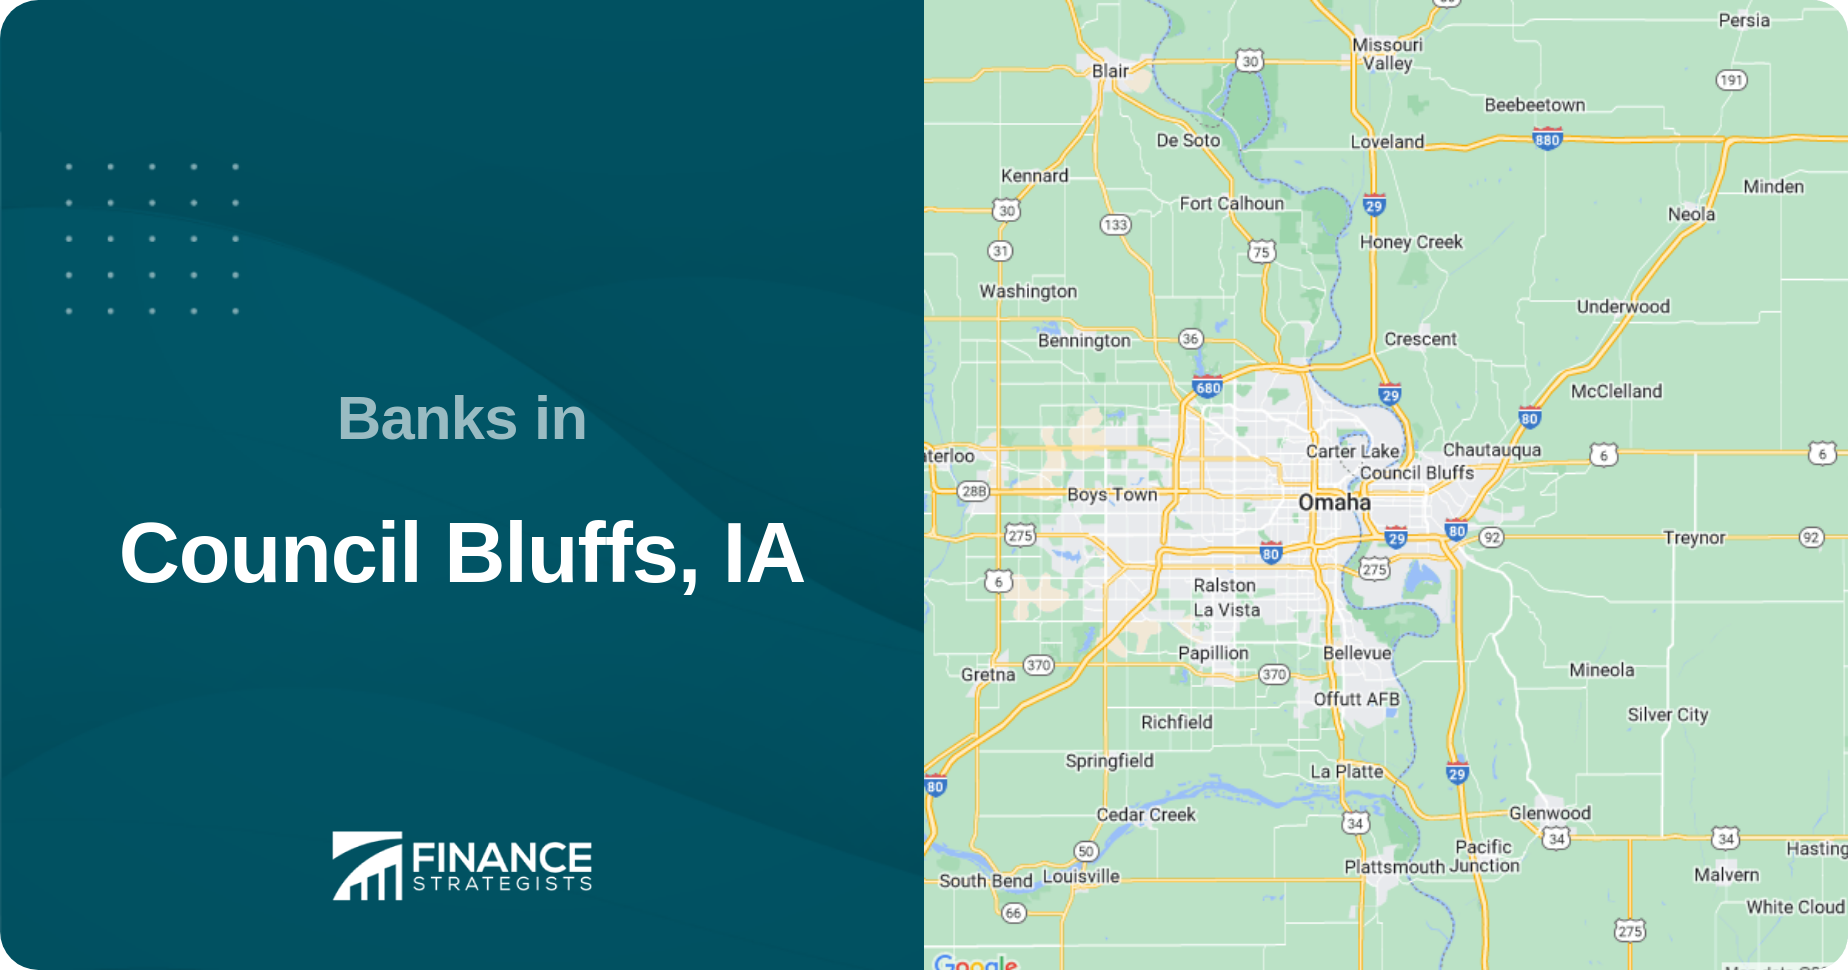 Banks in Council Bluffs, IA